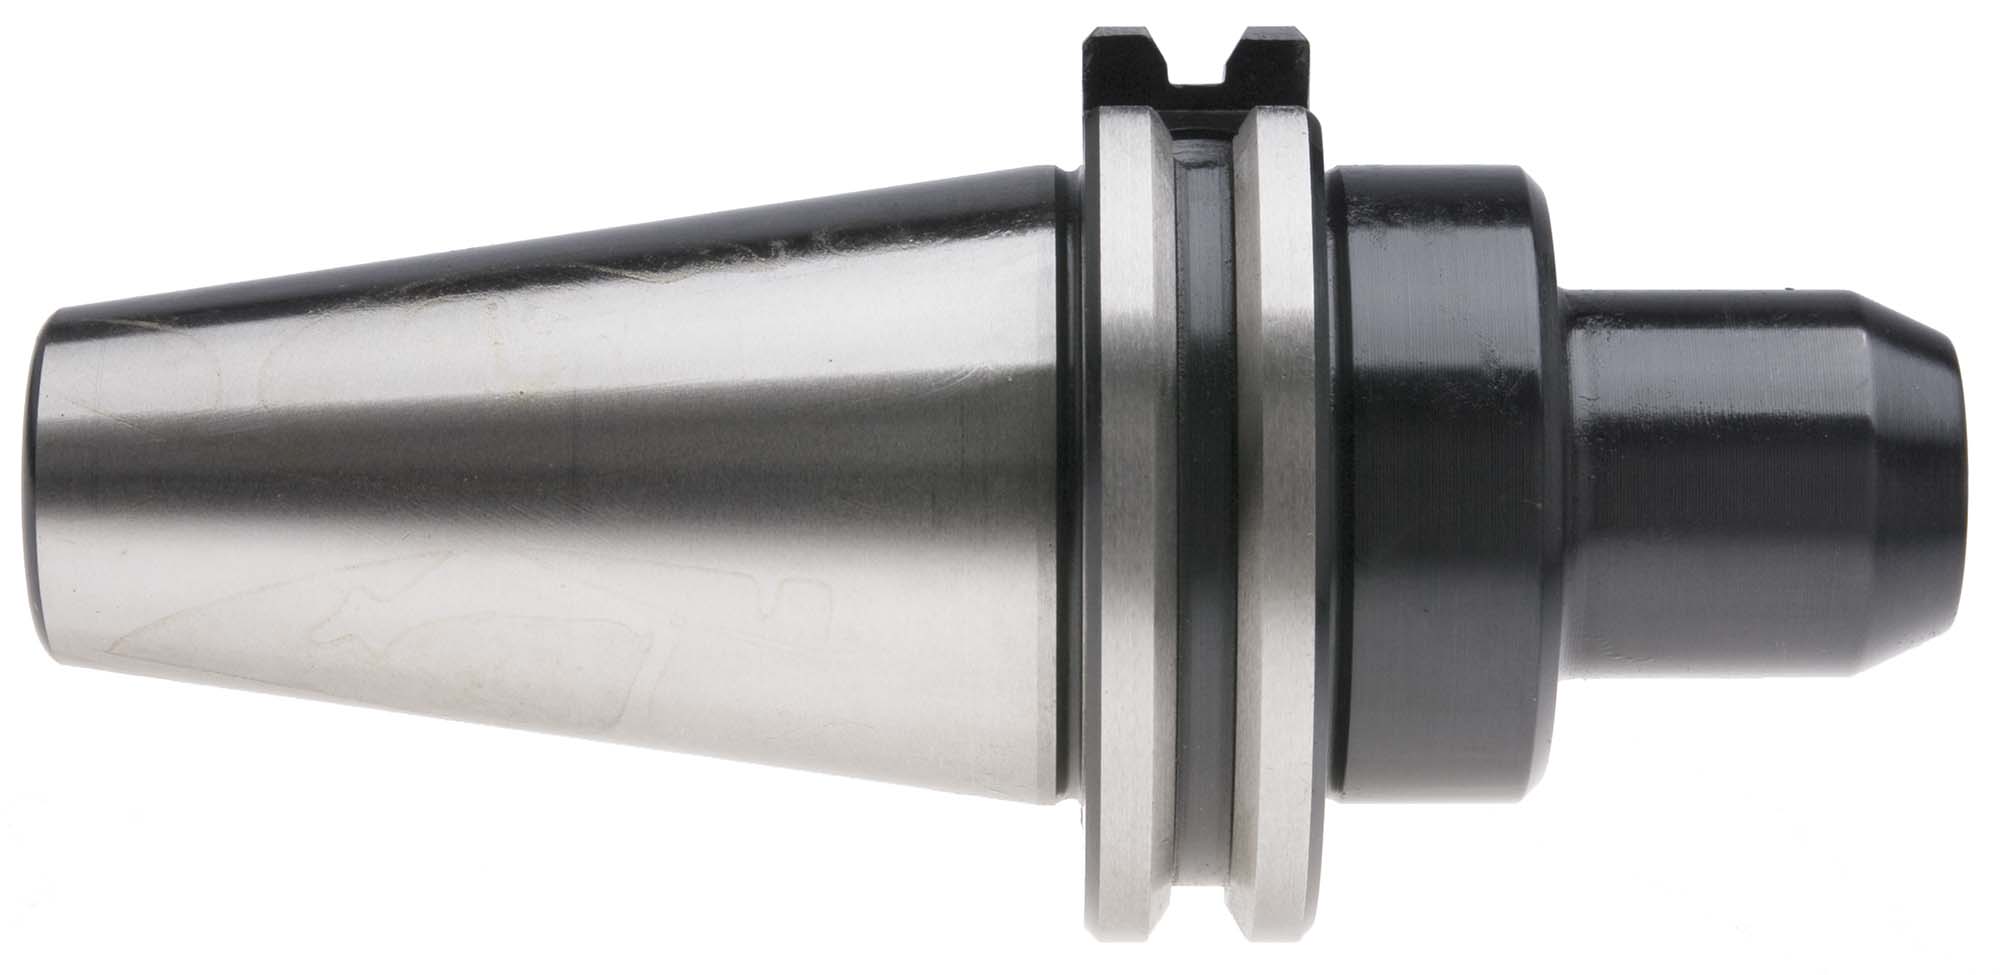 1/2" Cat 50 End Mill Adapter